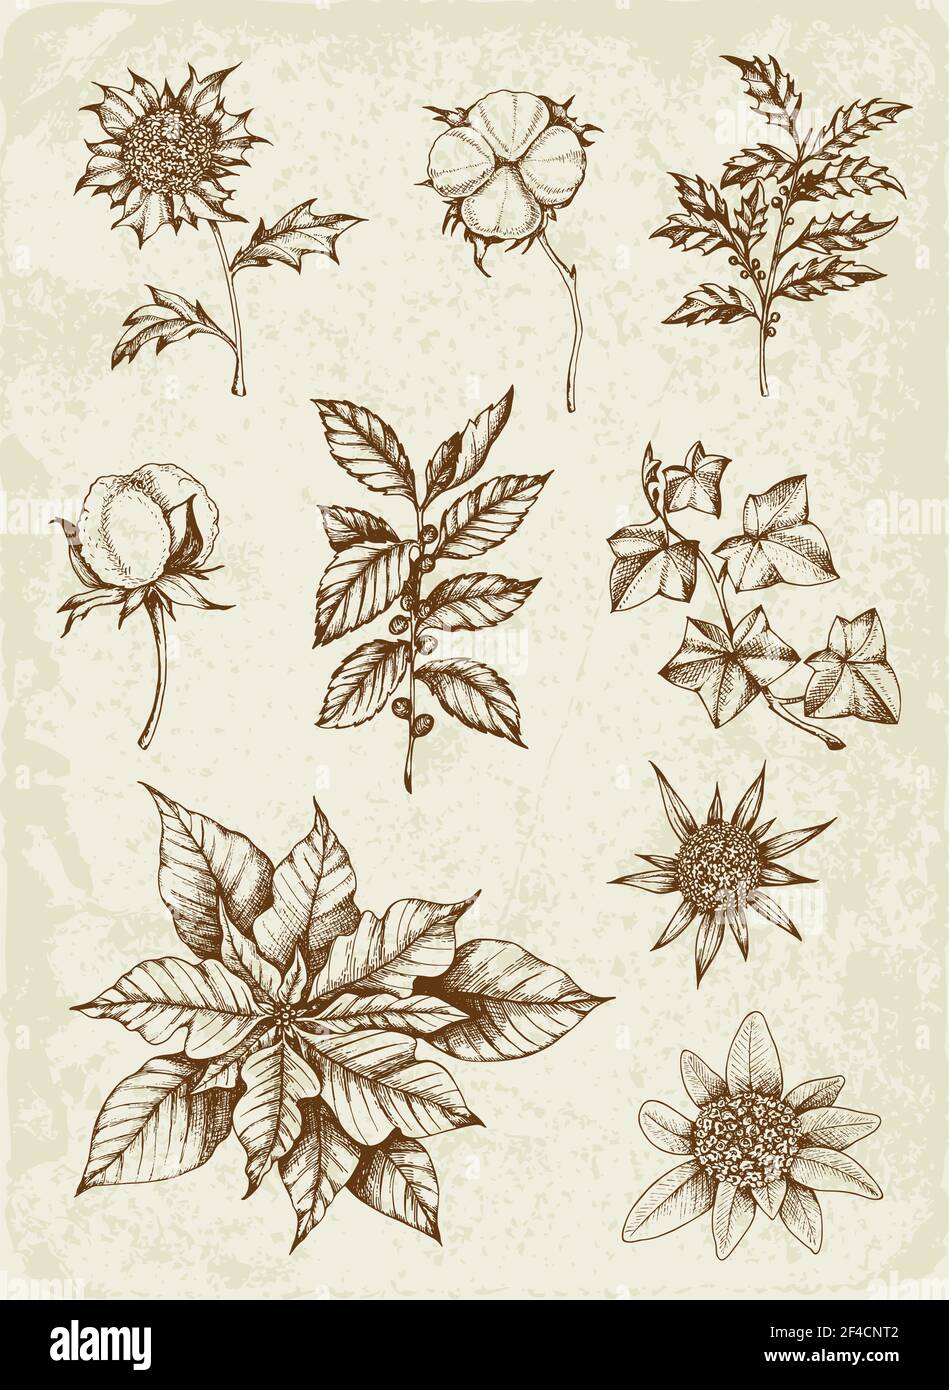 Set of winter evergreen plants and flowers. Decorative vintage elements for Christmas and new year design. Hand drawn illustration. Stock Vector